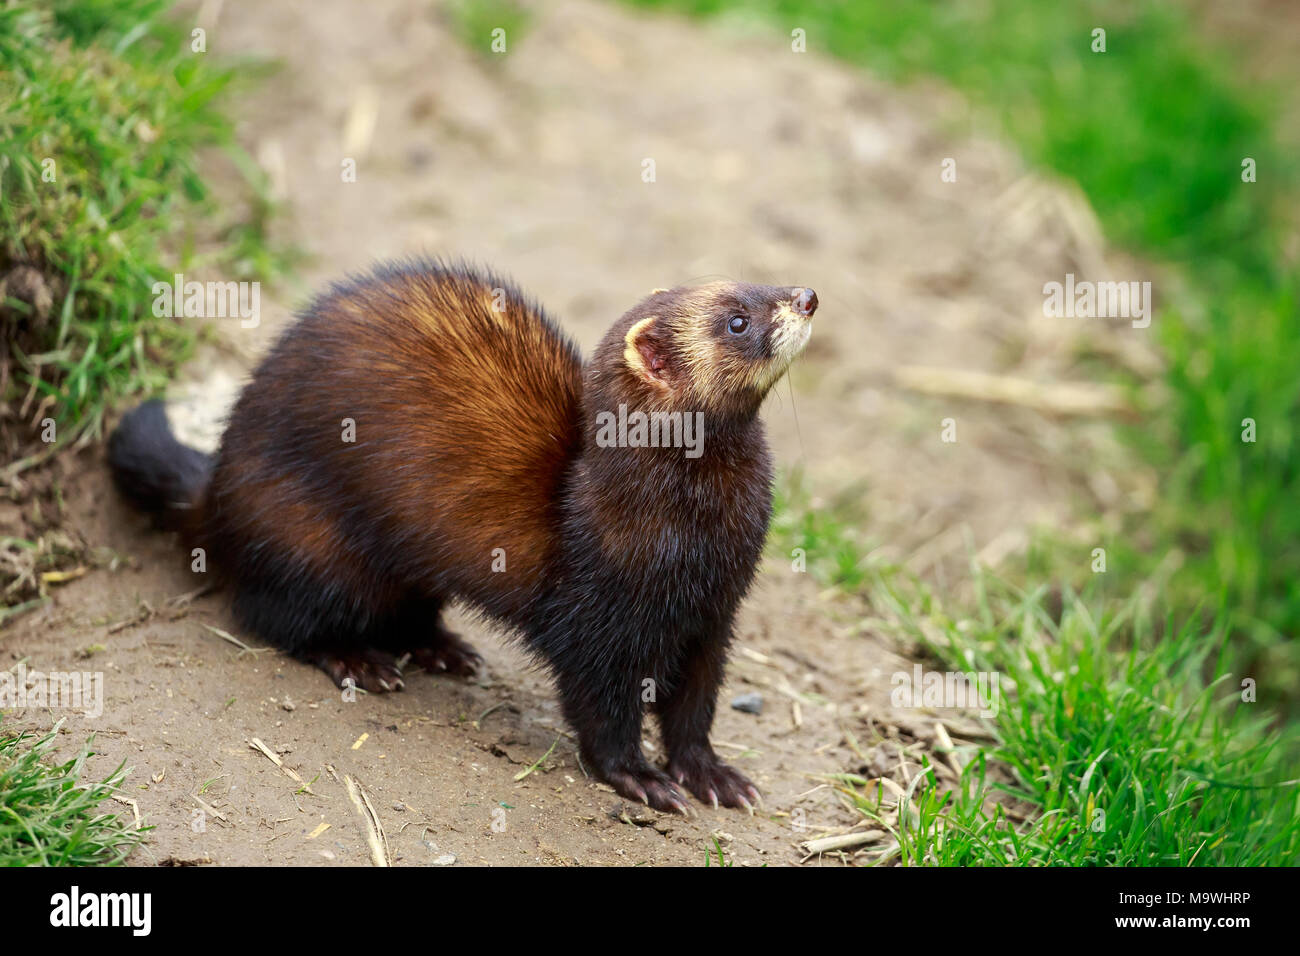 The European polecat – also known as the common ferret, black or forest polecat, or fitch – is a species of mustelid native to western Eurasia. Stock Photo